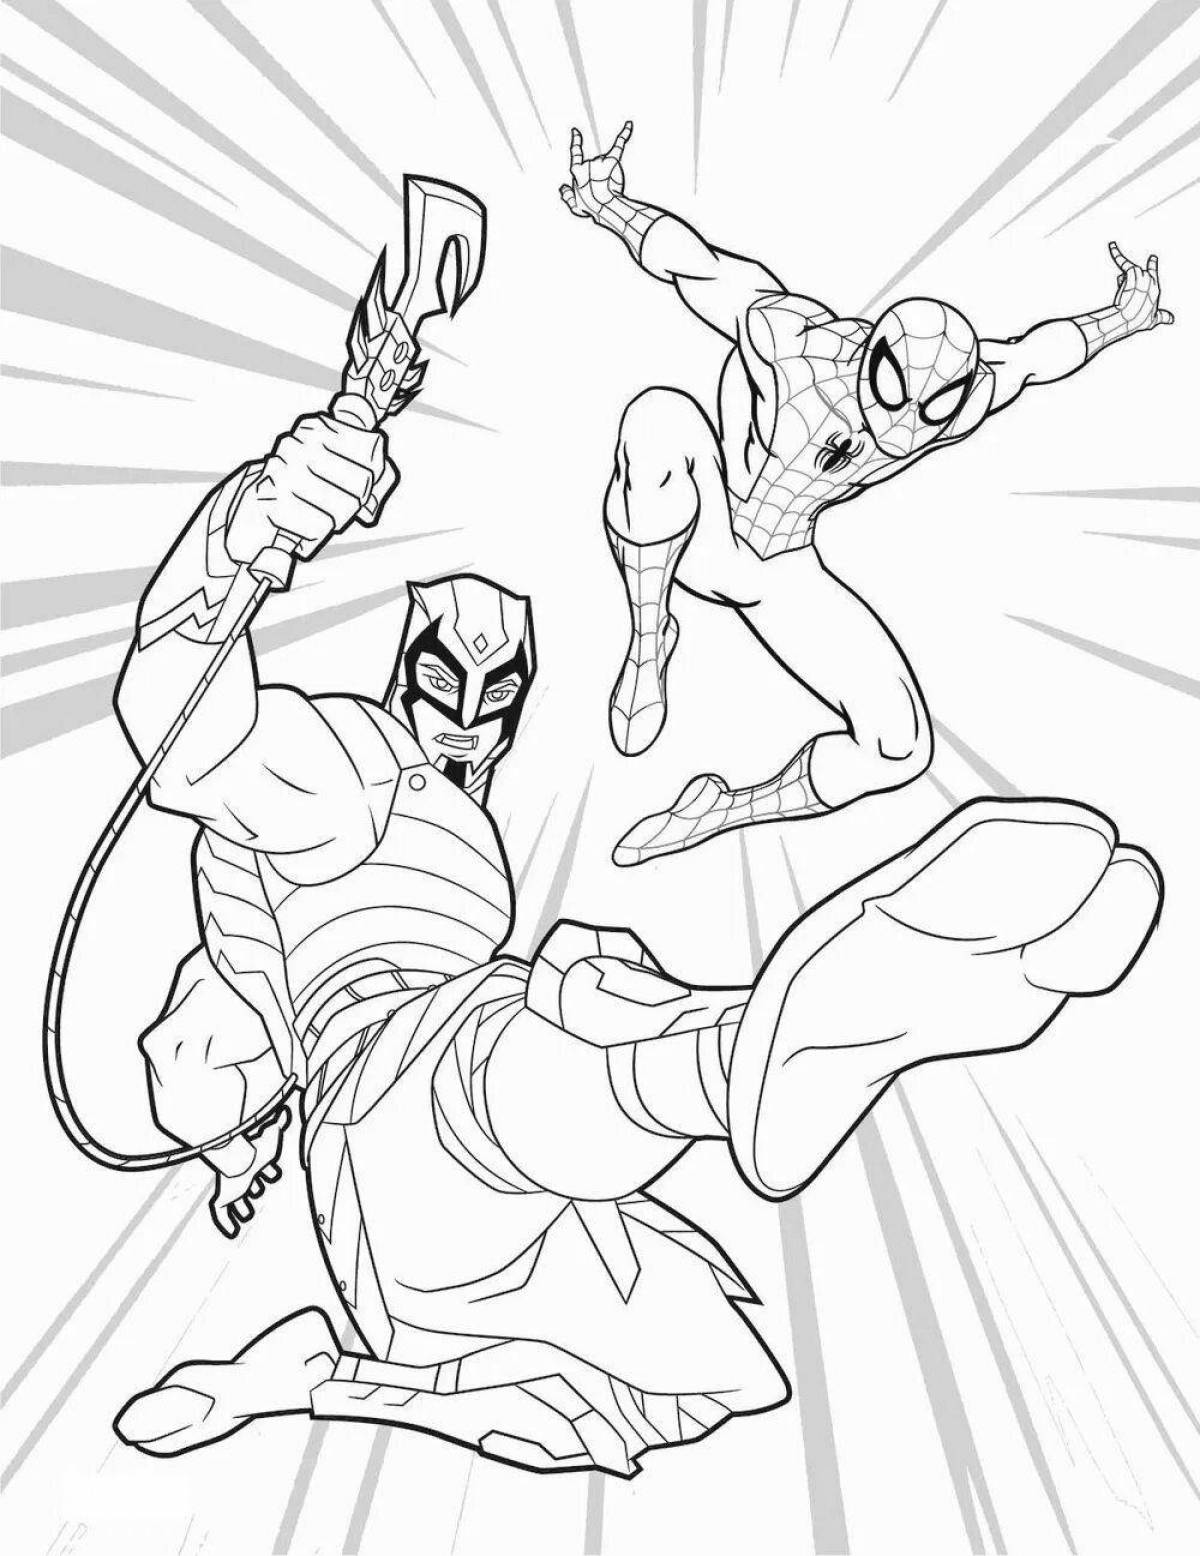 Marvelous spiderman coloring book